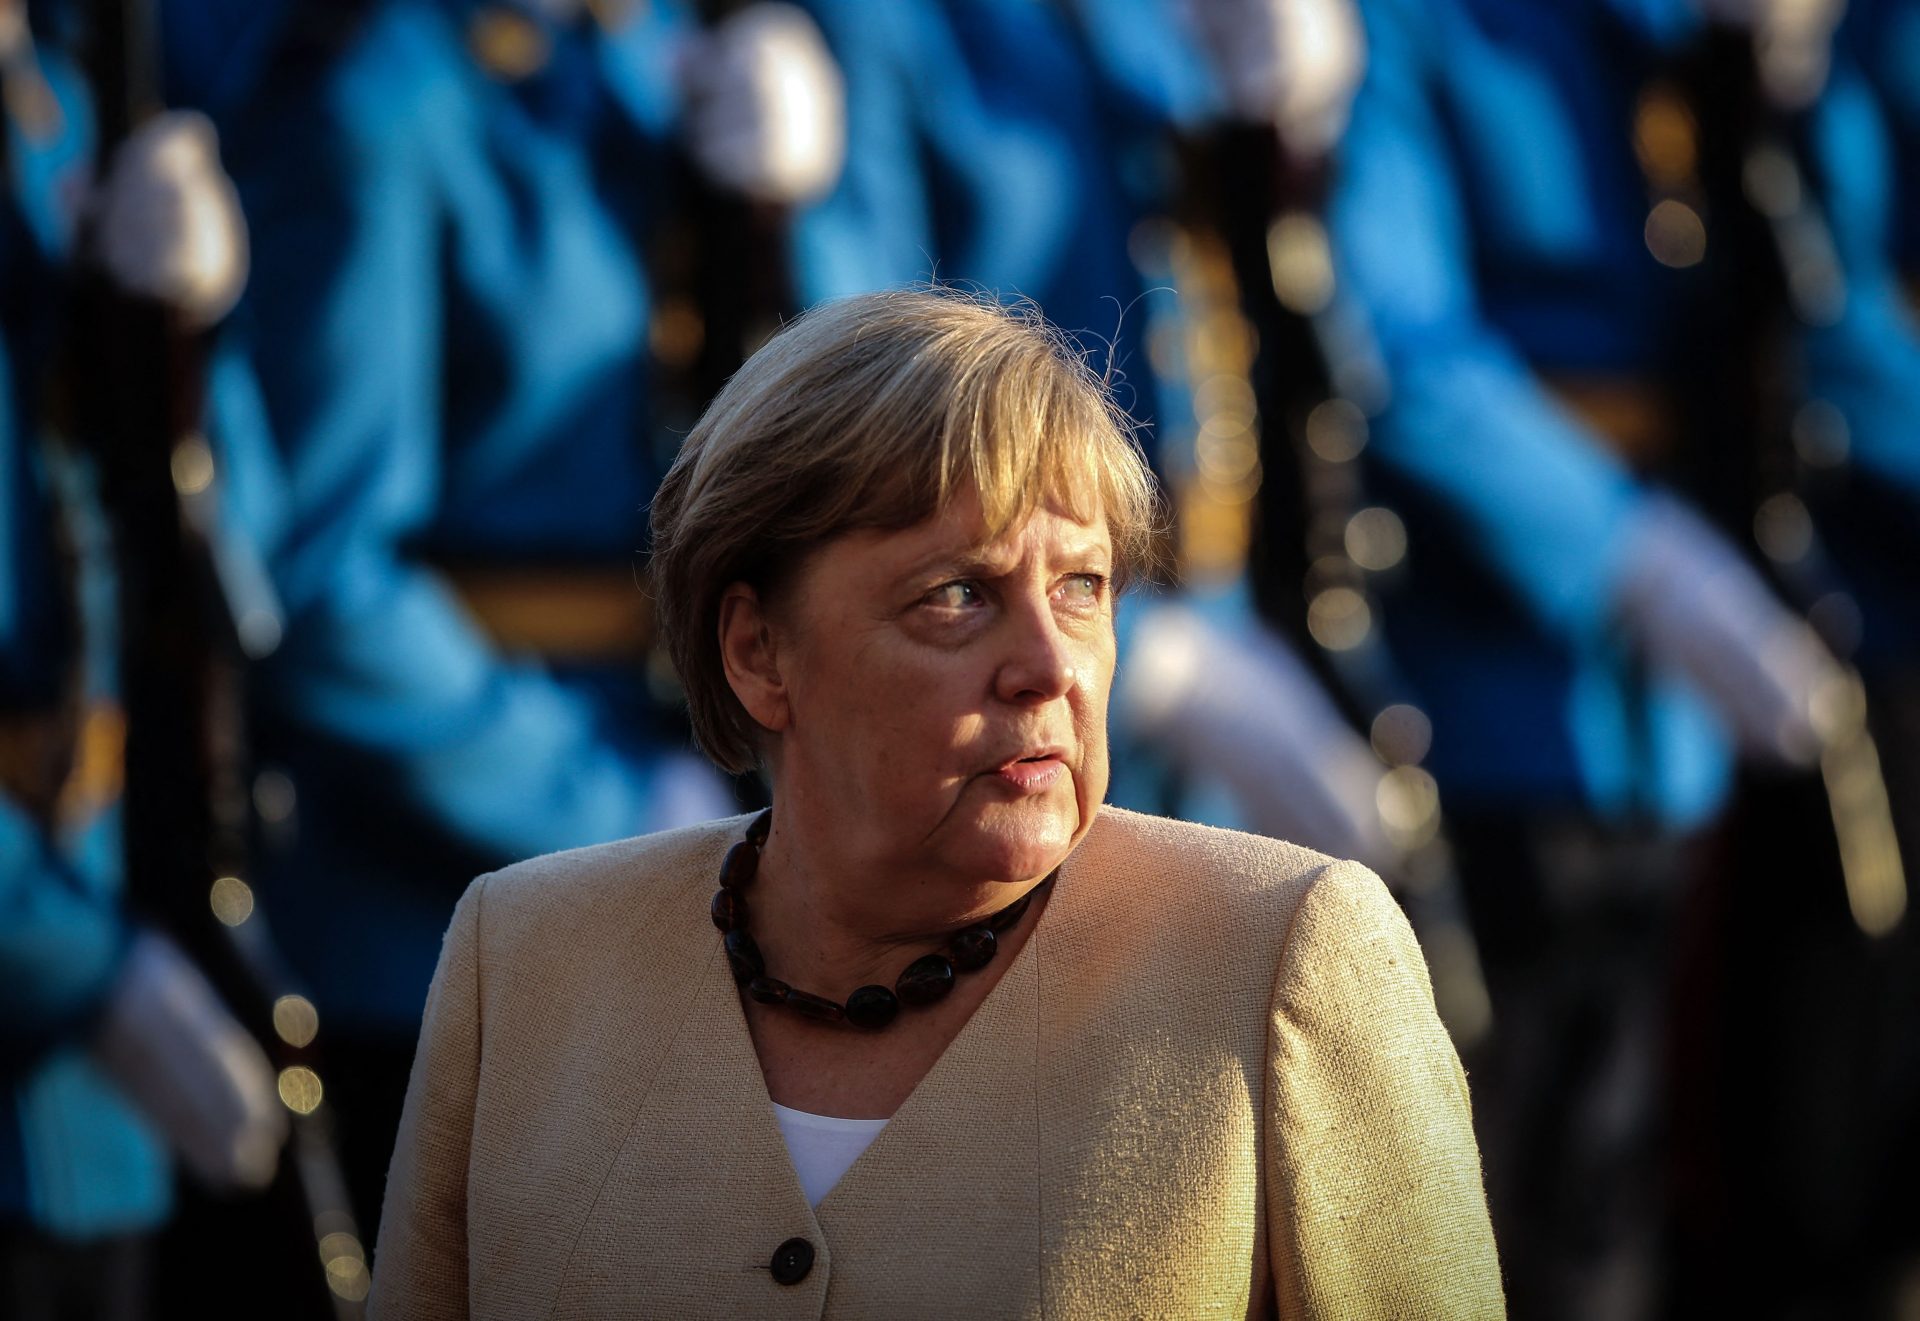 Merkel inspects a military guard of honour in Belgrade, Serbia, this month – on one of her final duties before the election. Photo: OLIVER BUNIC/AFP via Getty Images